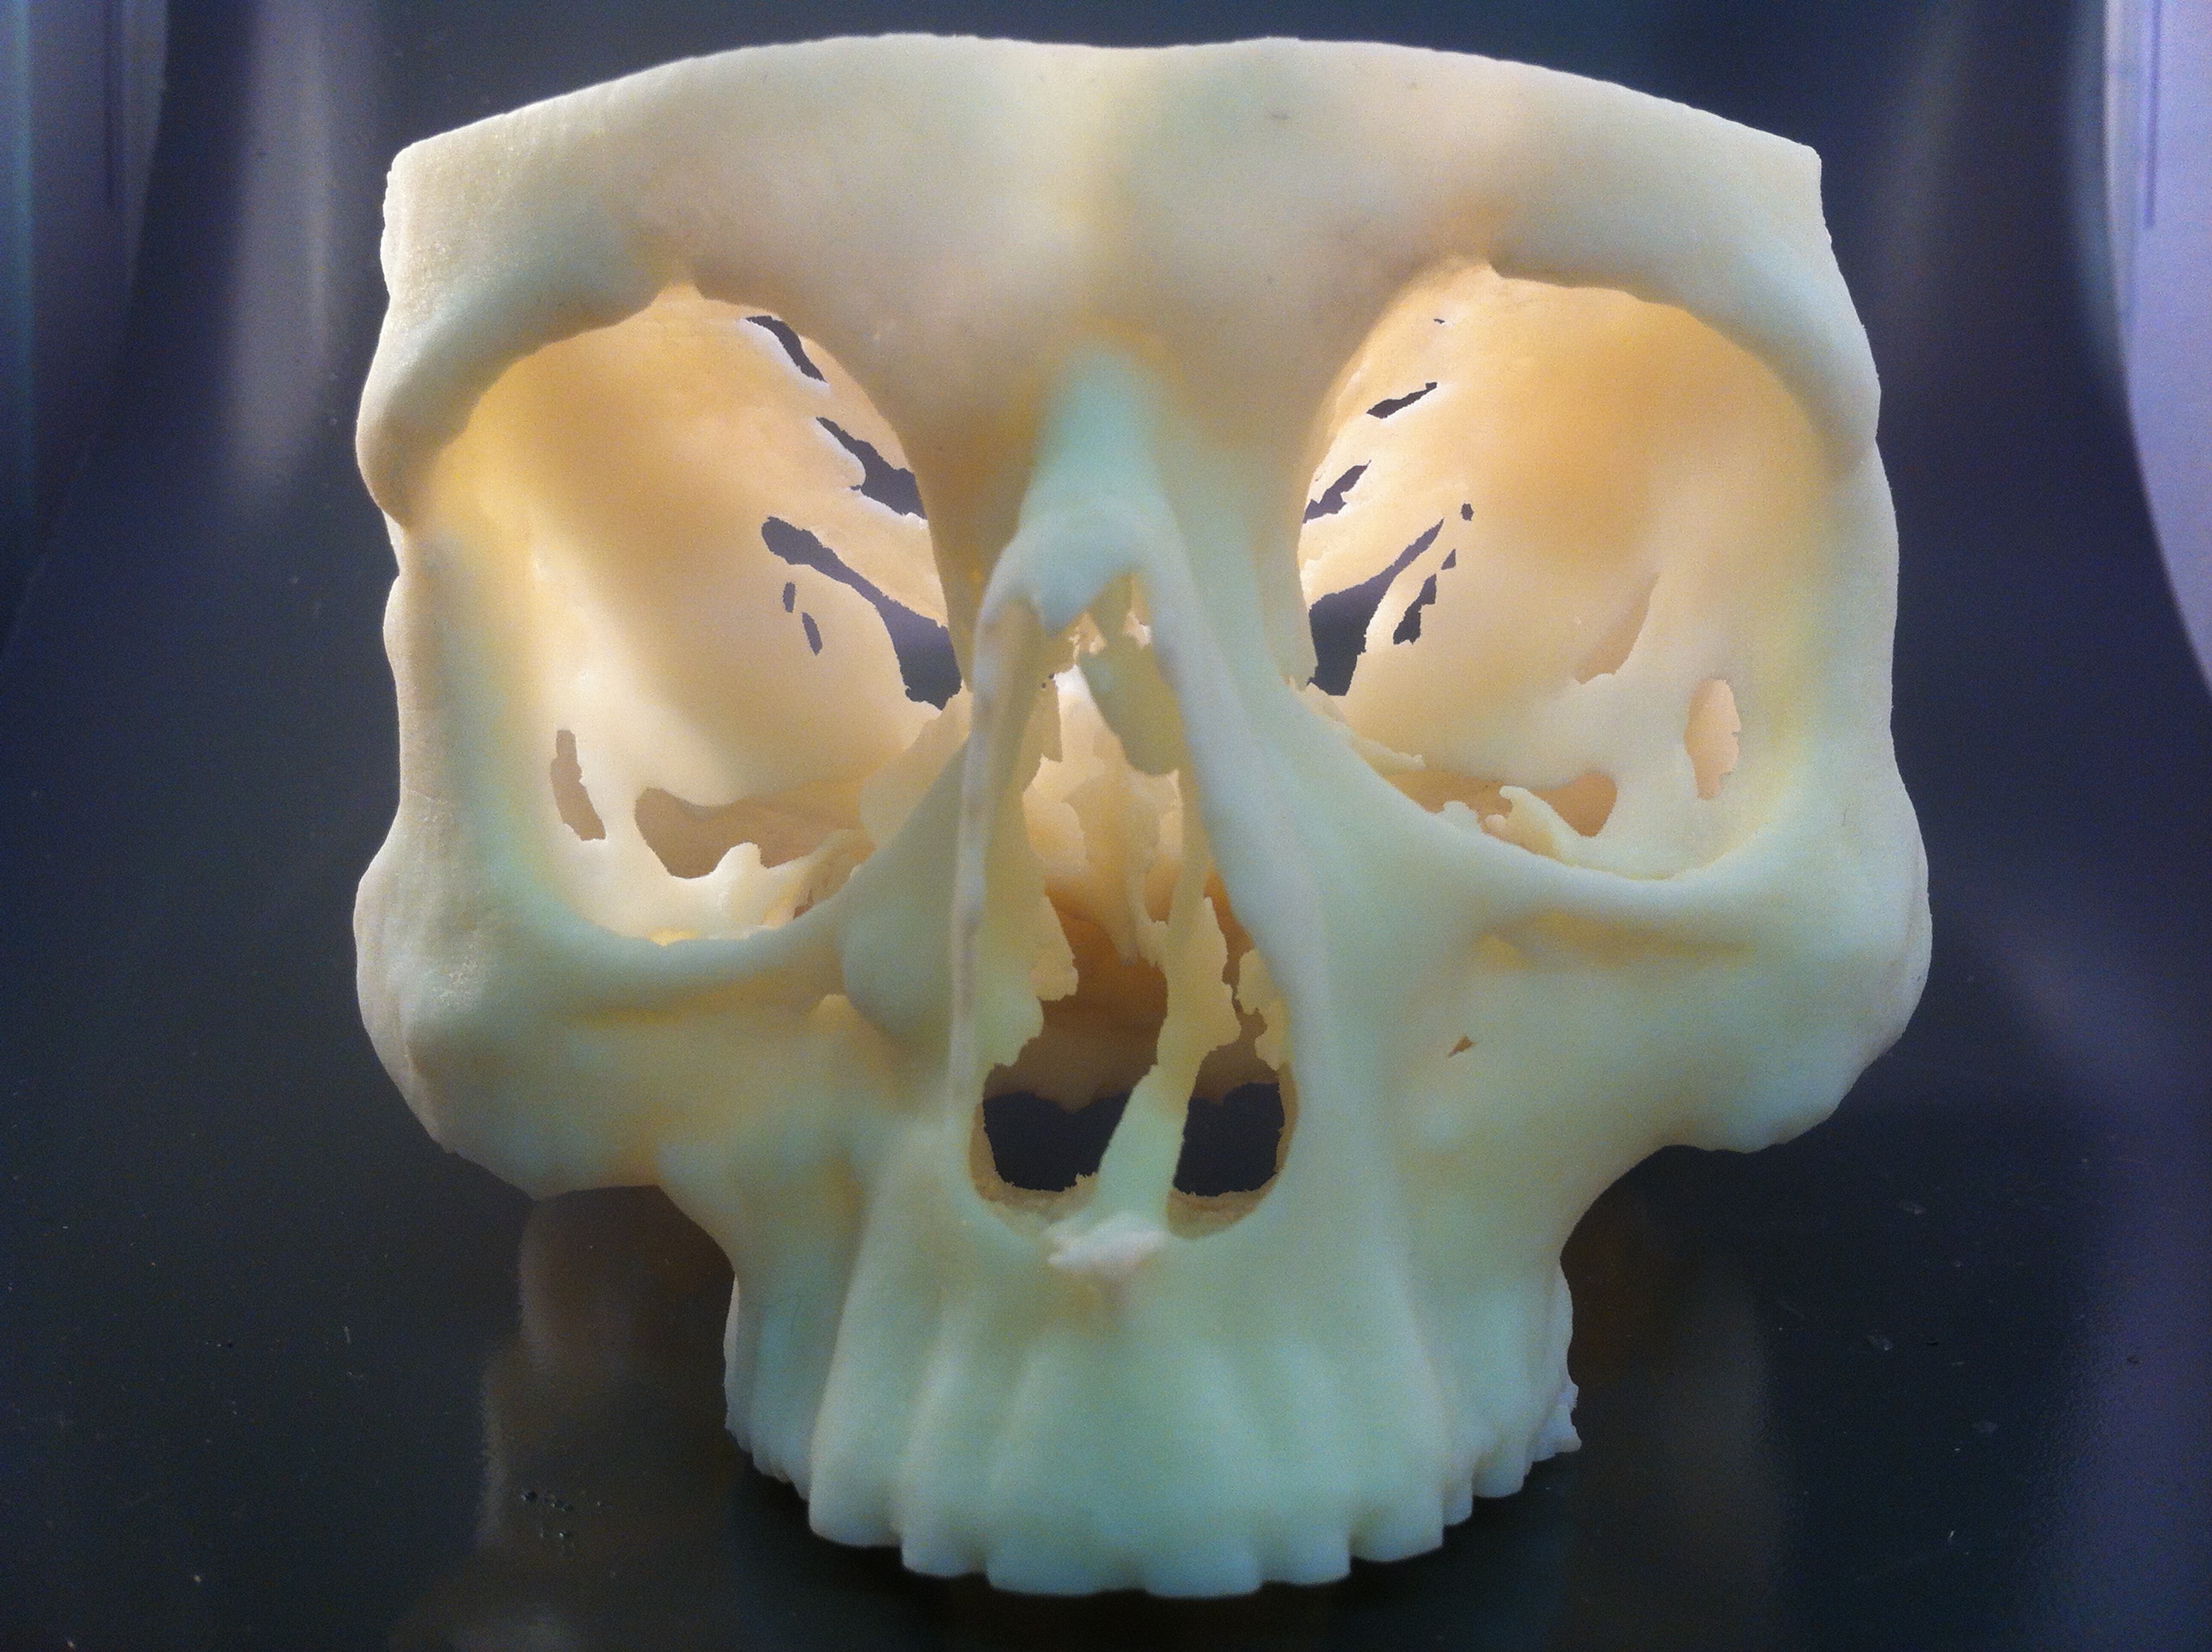 This skull was built on a Stratasys Objet 30 Pro, and was used to validate patient surgery prior to operation. Courtesy of Stratasys.